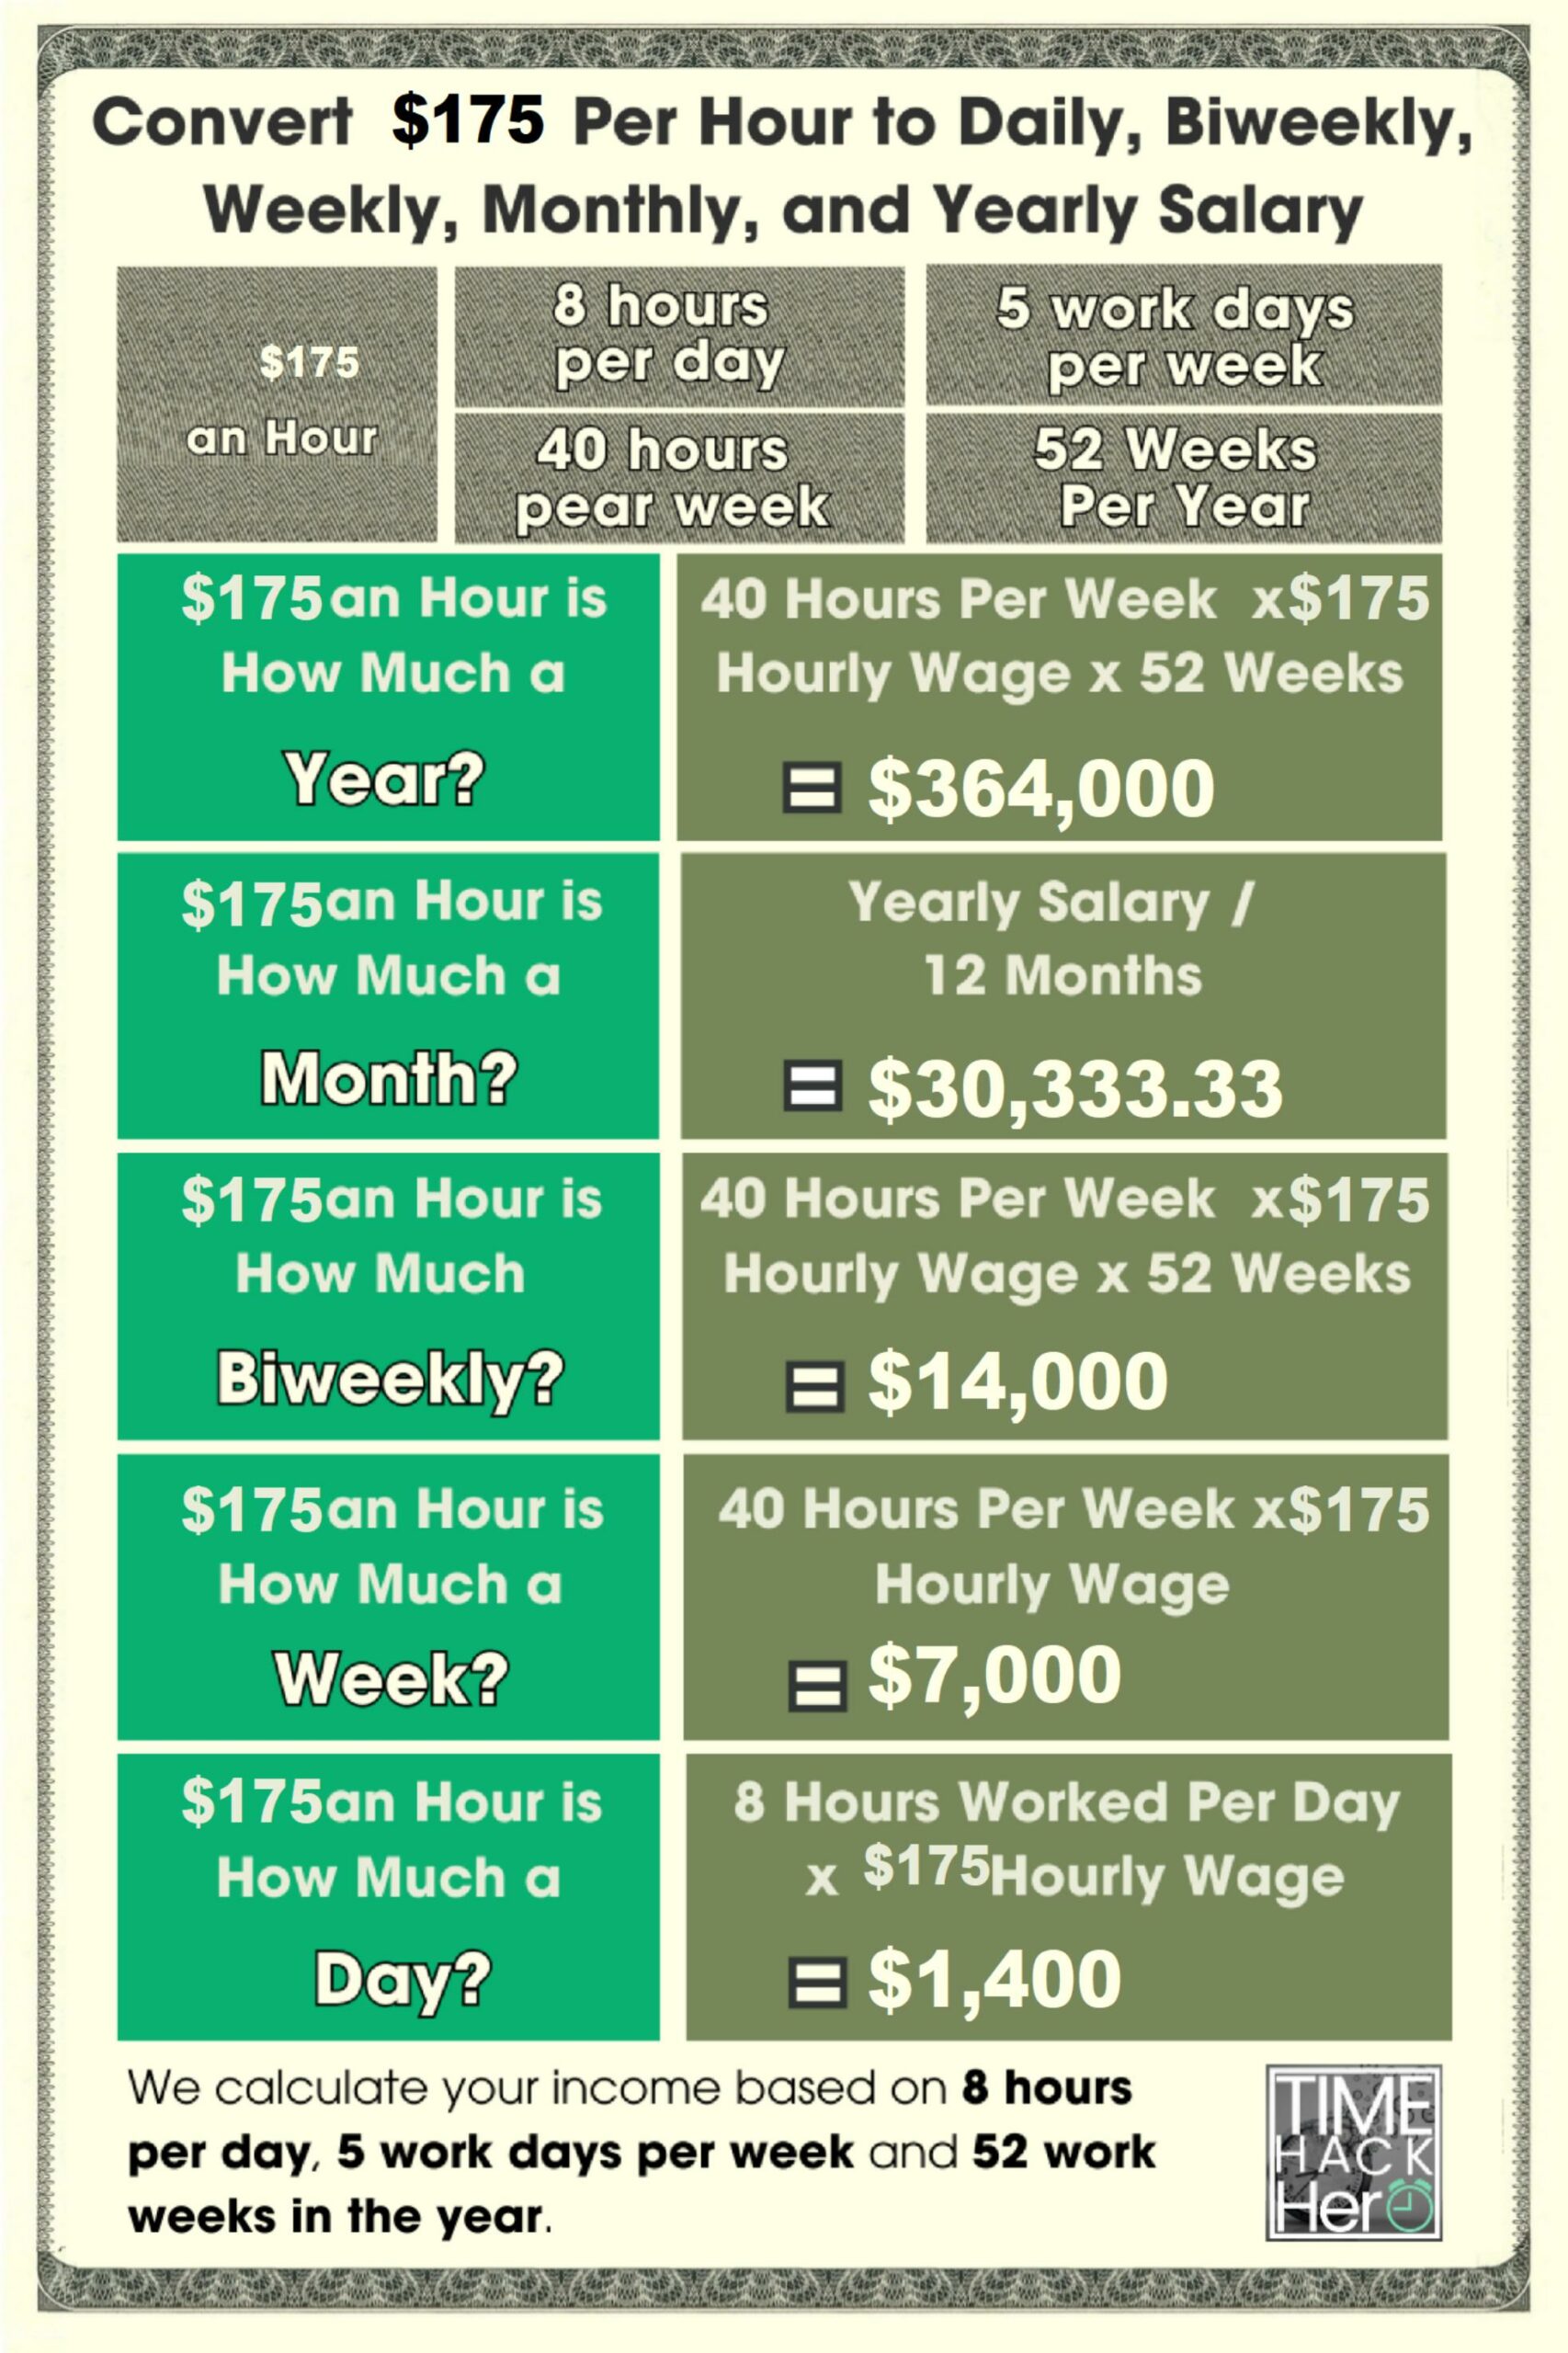 Convert $175 Per Hour to Weekly, Monthly, and Yearly Salary